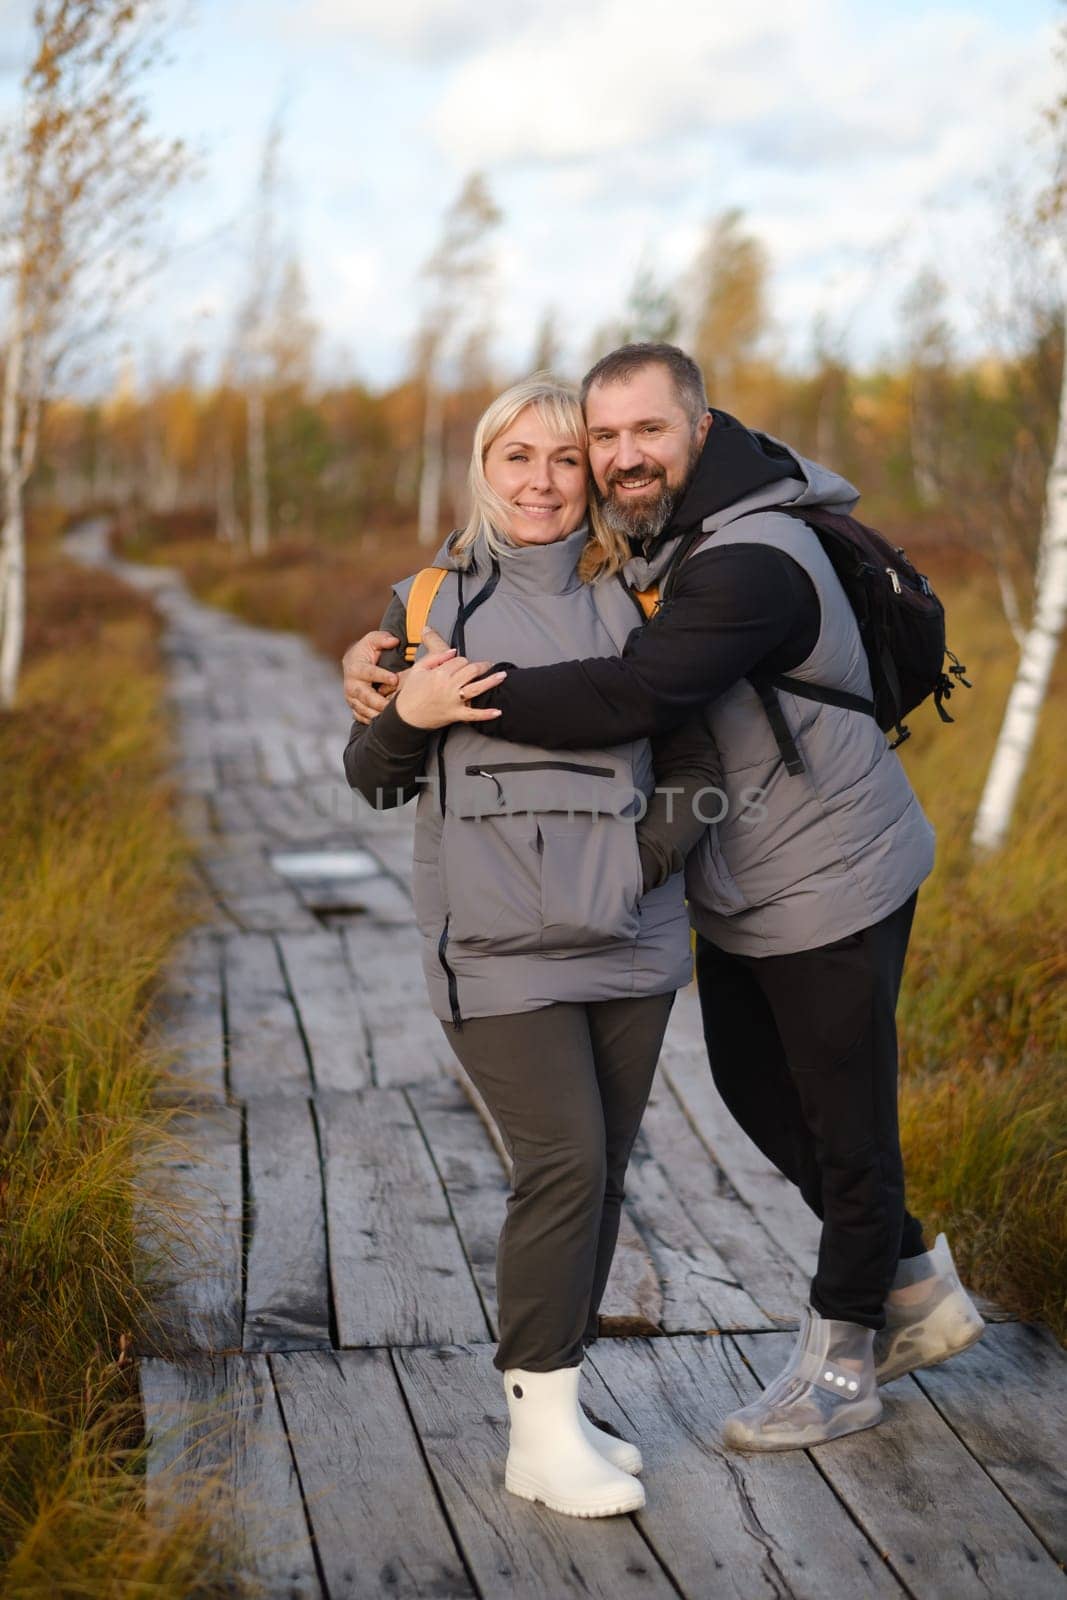 People in boots stand hugging on a wooden path in a swamp in Yelnya, Belarus by Lobachad